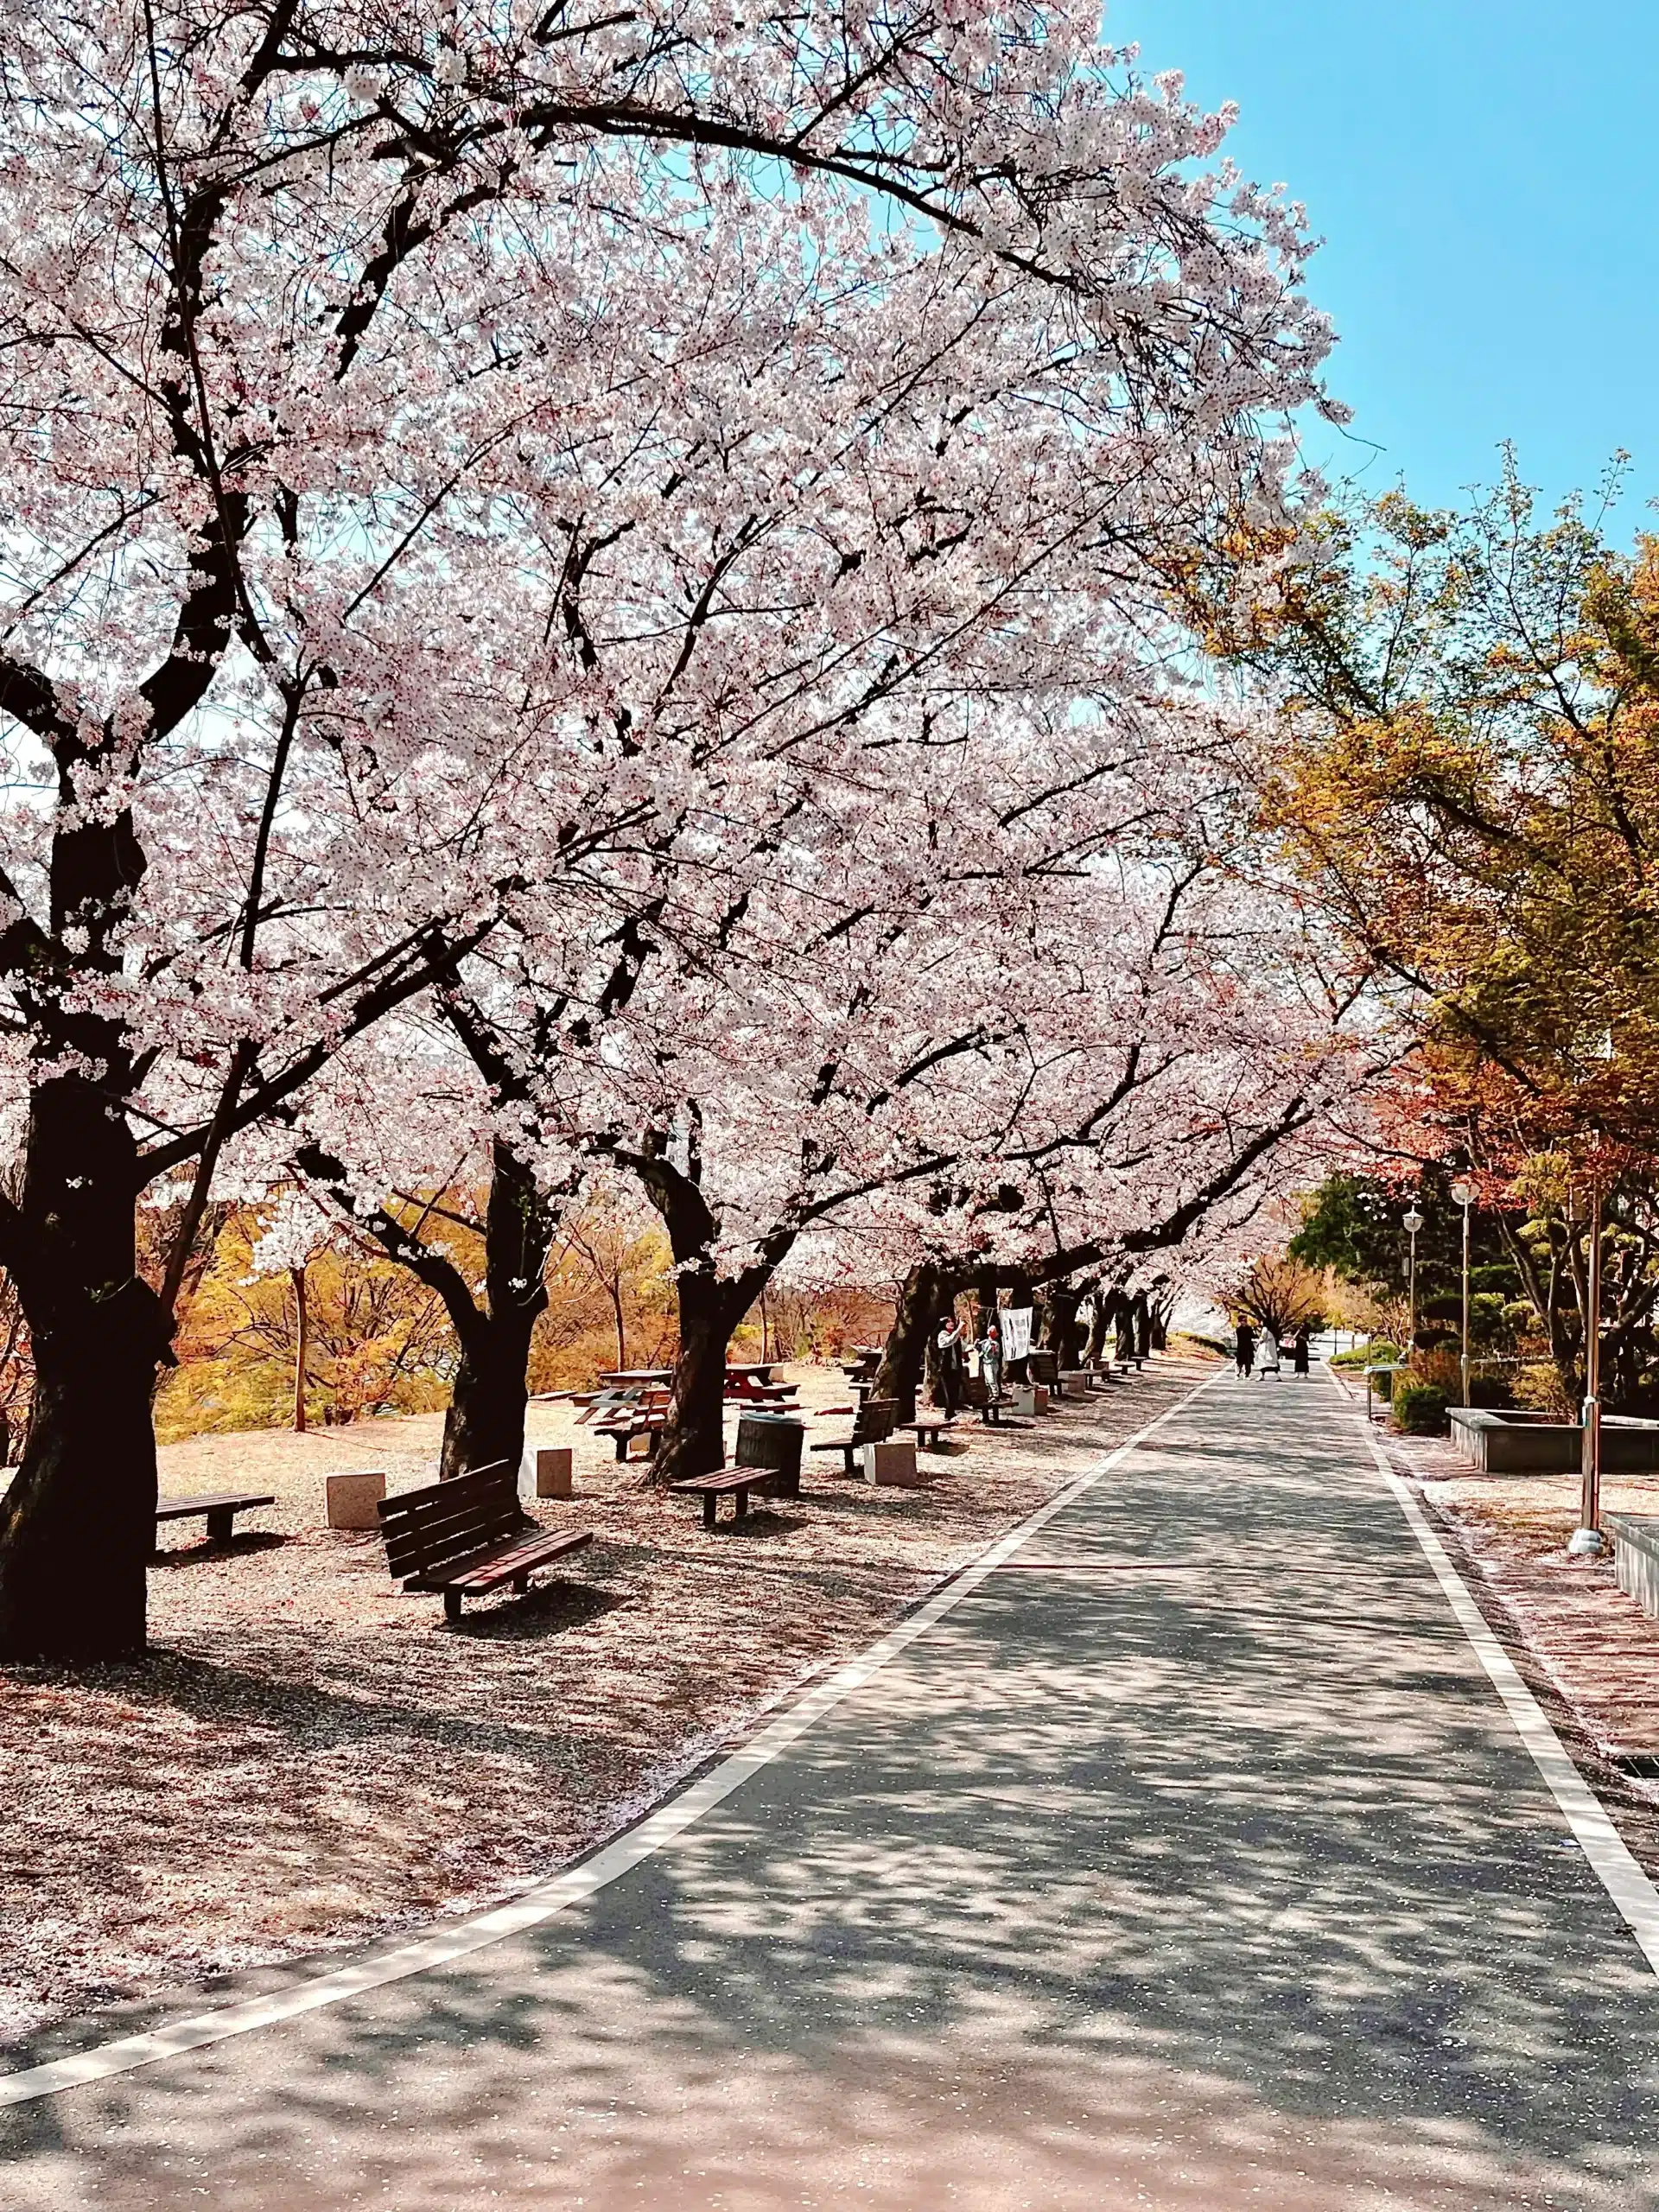 are cherry blossoms trees ever green